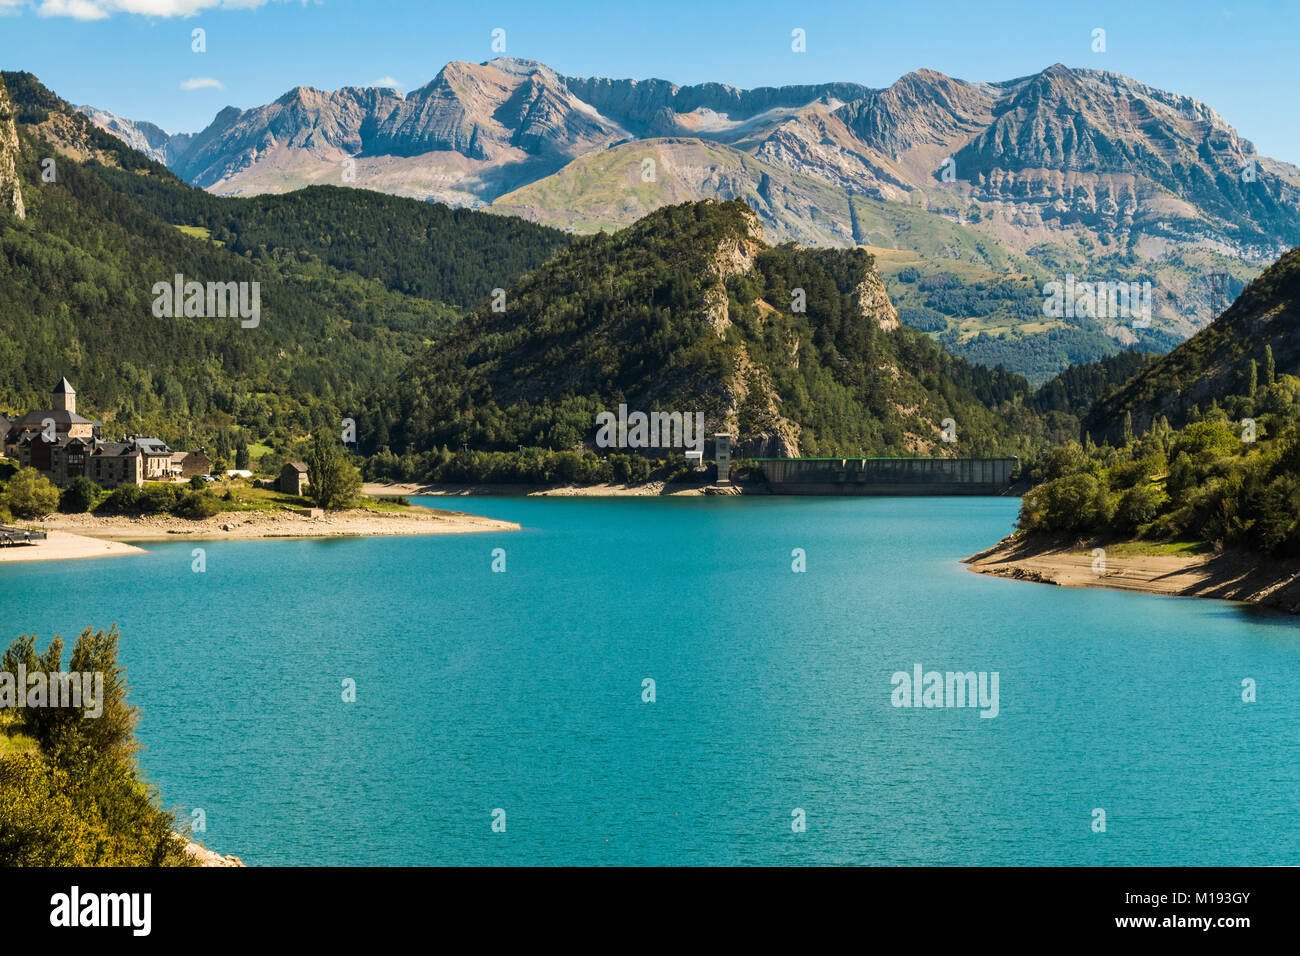 Lanuza village & resevoir of same name, with the dam and Tendenera mountains beyond, Tena Valley. Sallent de Gallego; Pyrenees; Huesca Province; Spain Stock Photo